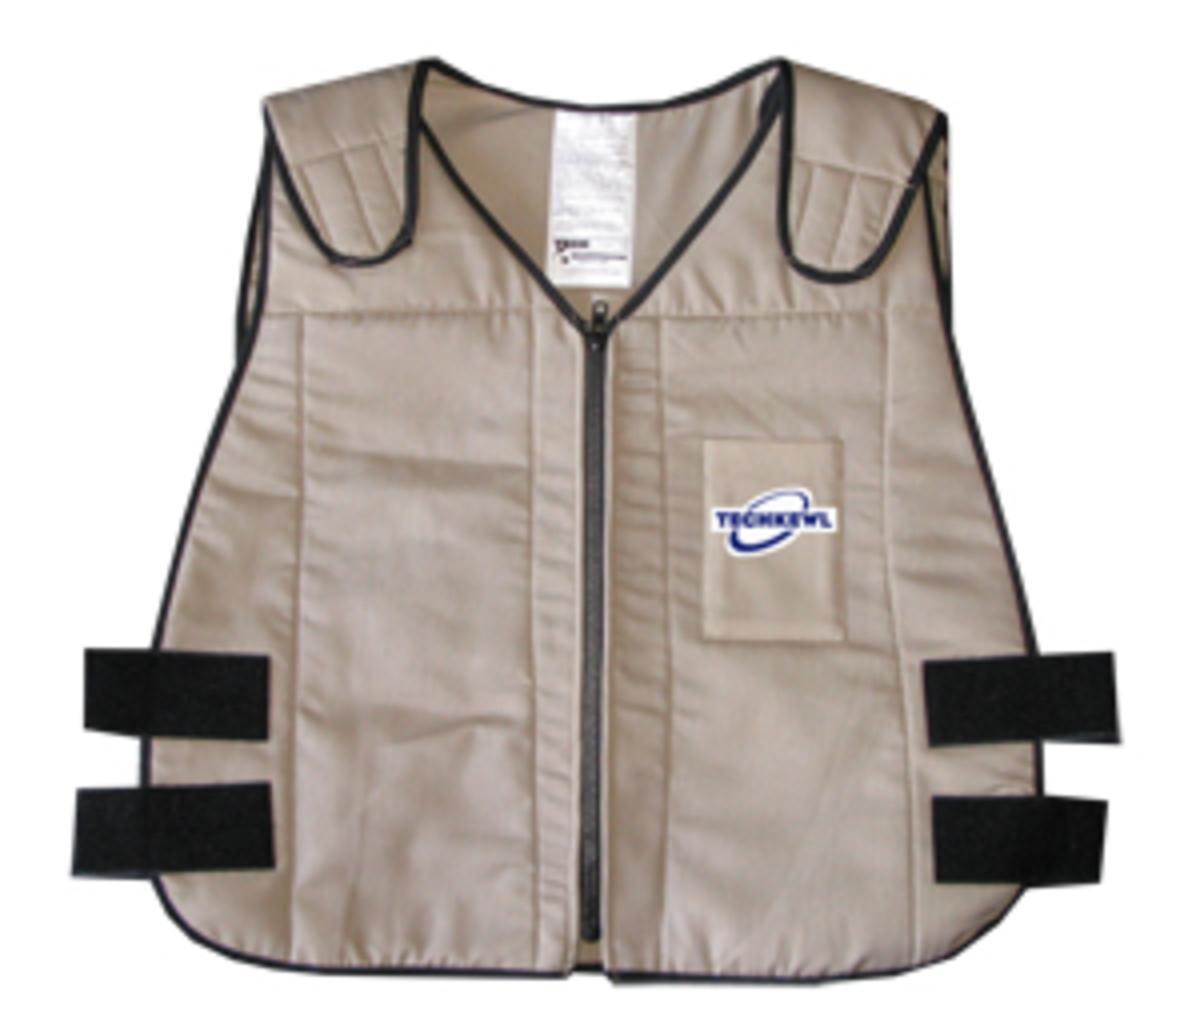 Techniche TechKewl Phase Change Cooling Vest with Inserts and Cooler - Black